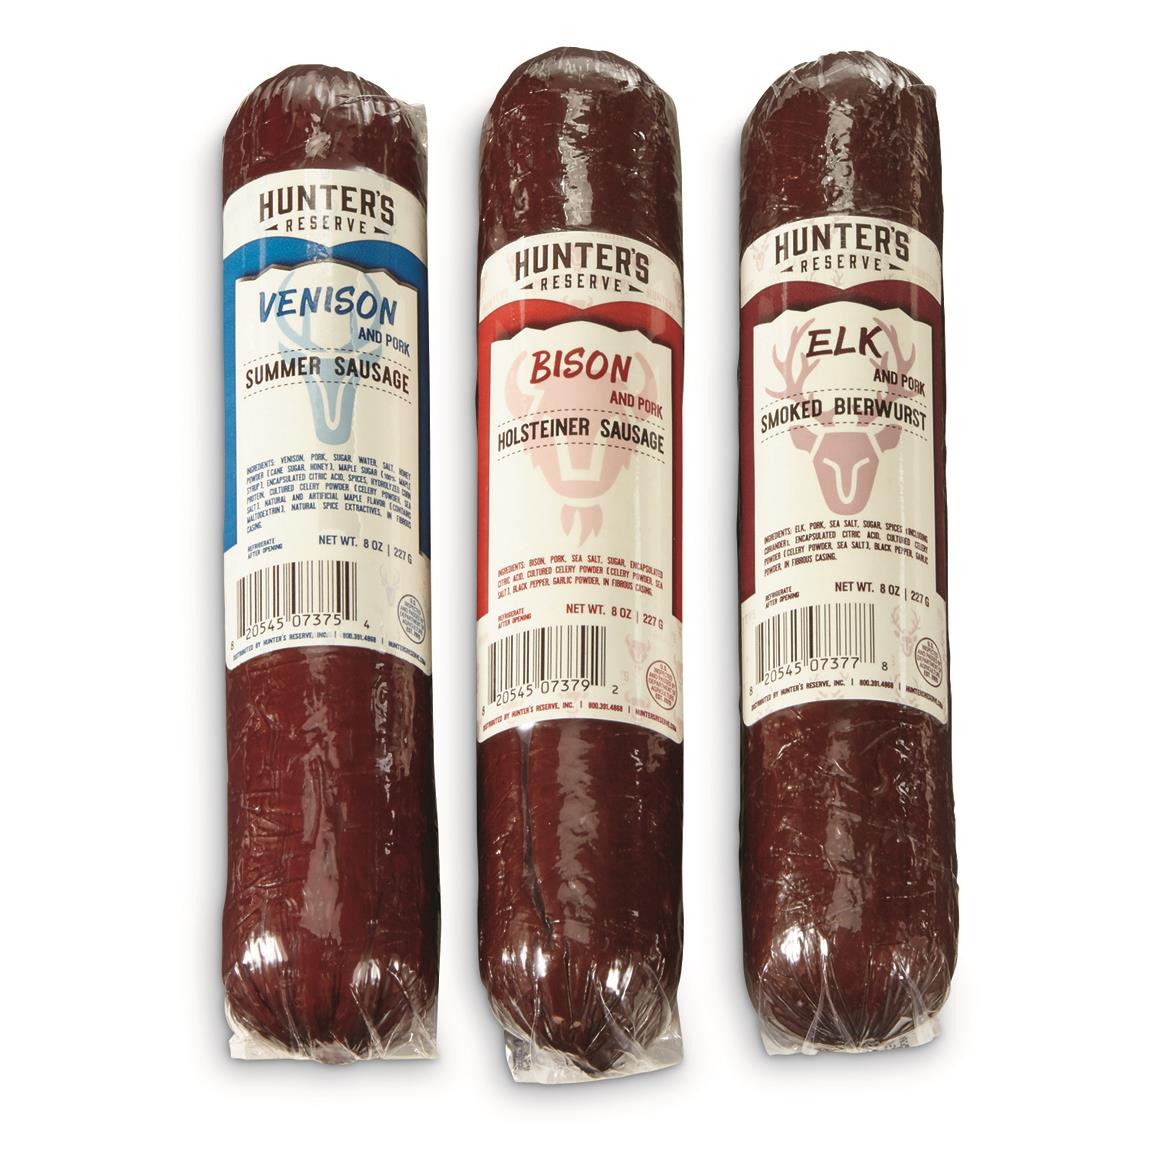 1 lb. of Hunters Reserve Roadkill Summer Sausage 192621, Food Gifts